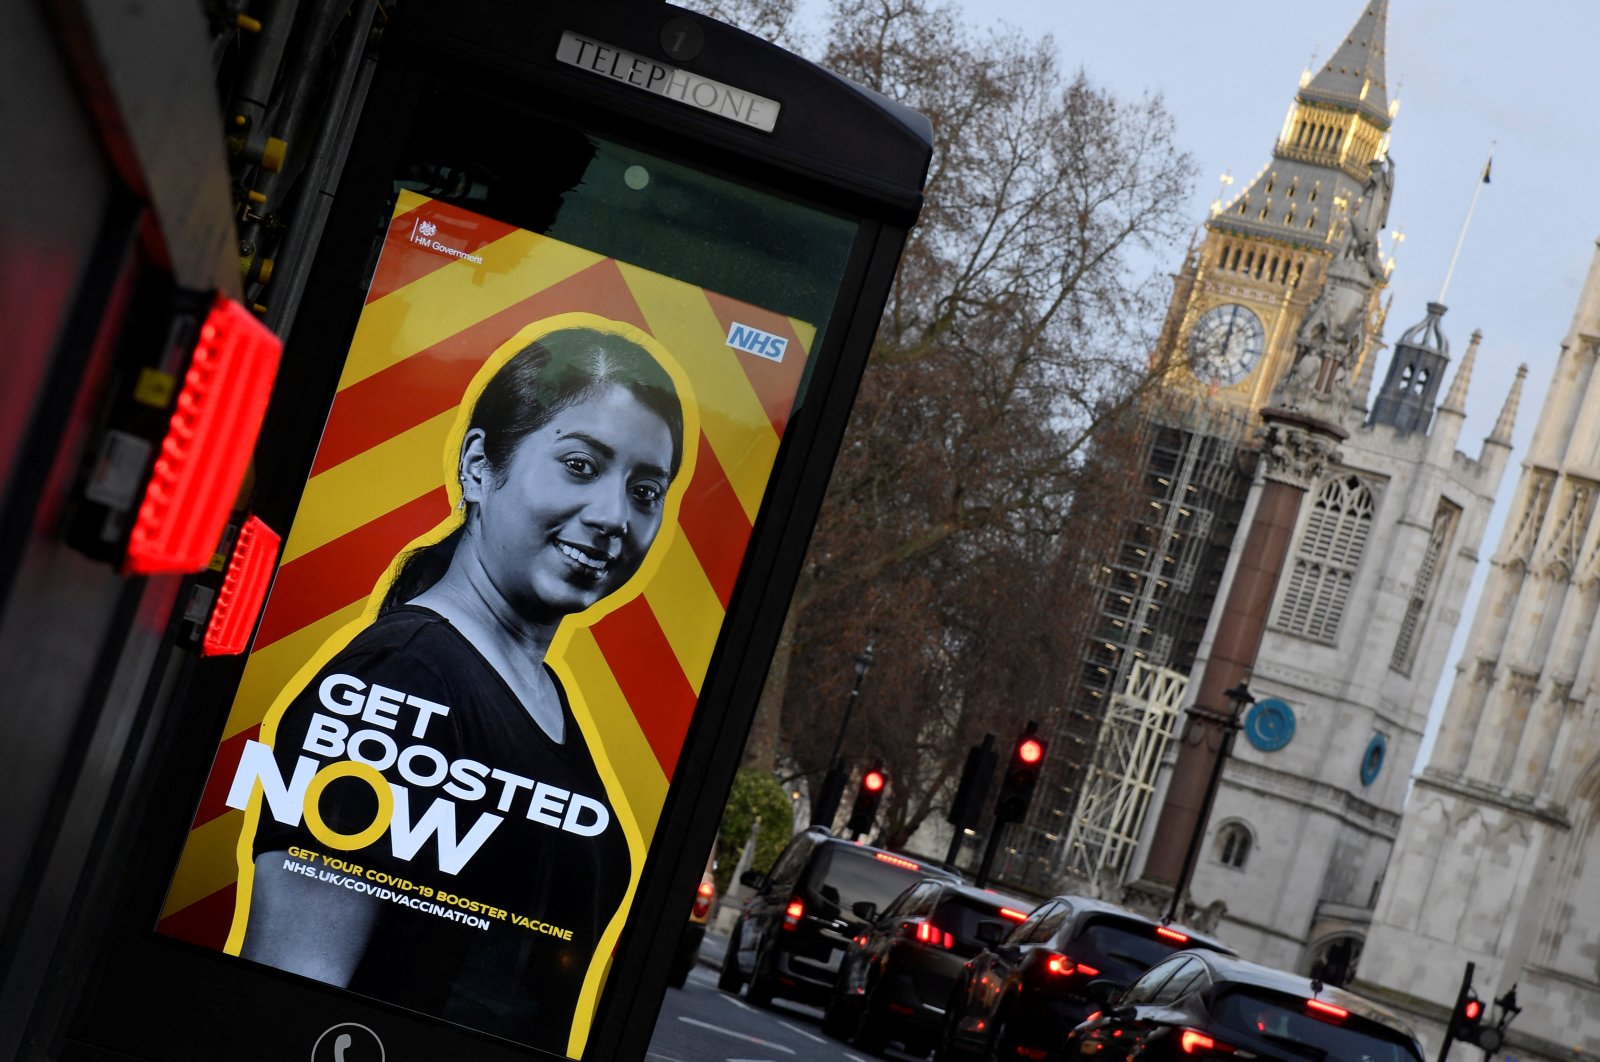 A public health advertisement encouraging people to get a booster vaccination is seen near Big Ben and the Houses of Parliament, in London, U.K., Dec. 29, 2021. (Reuters Photo)